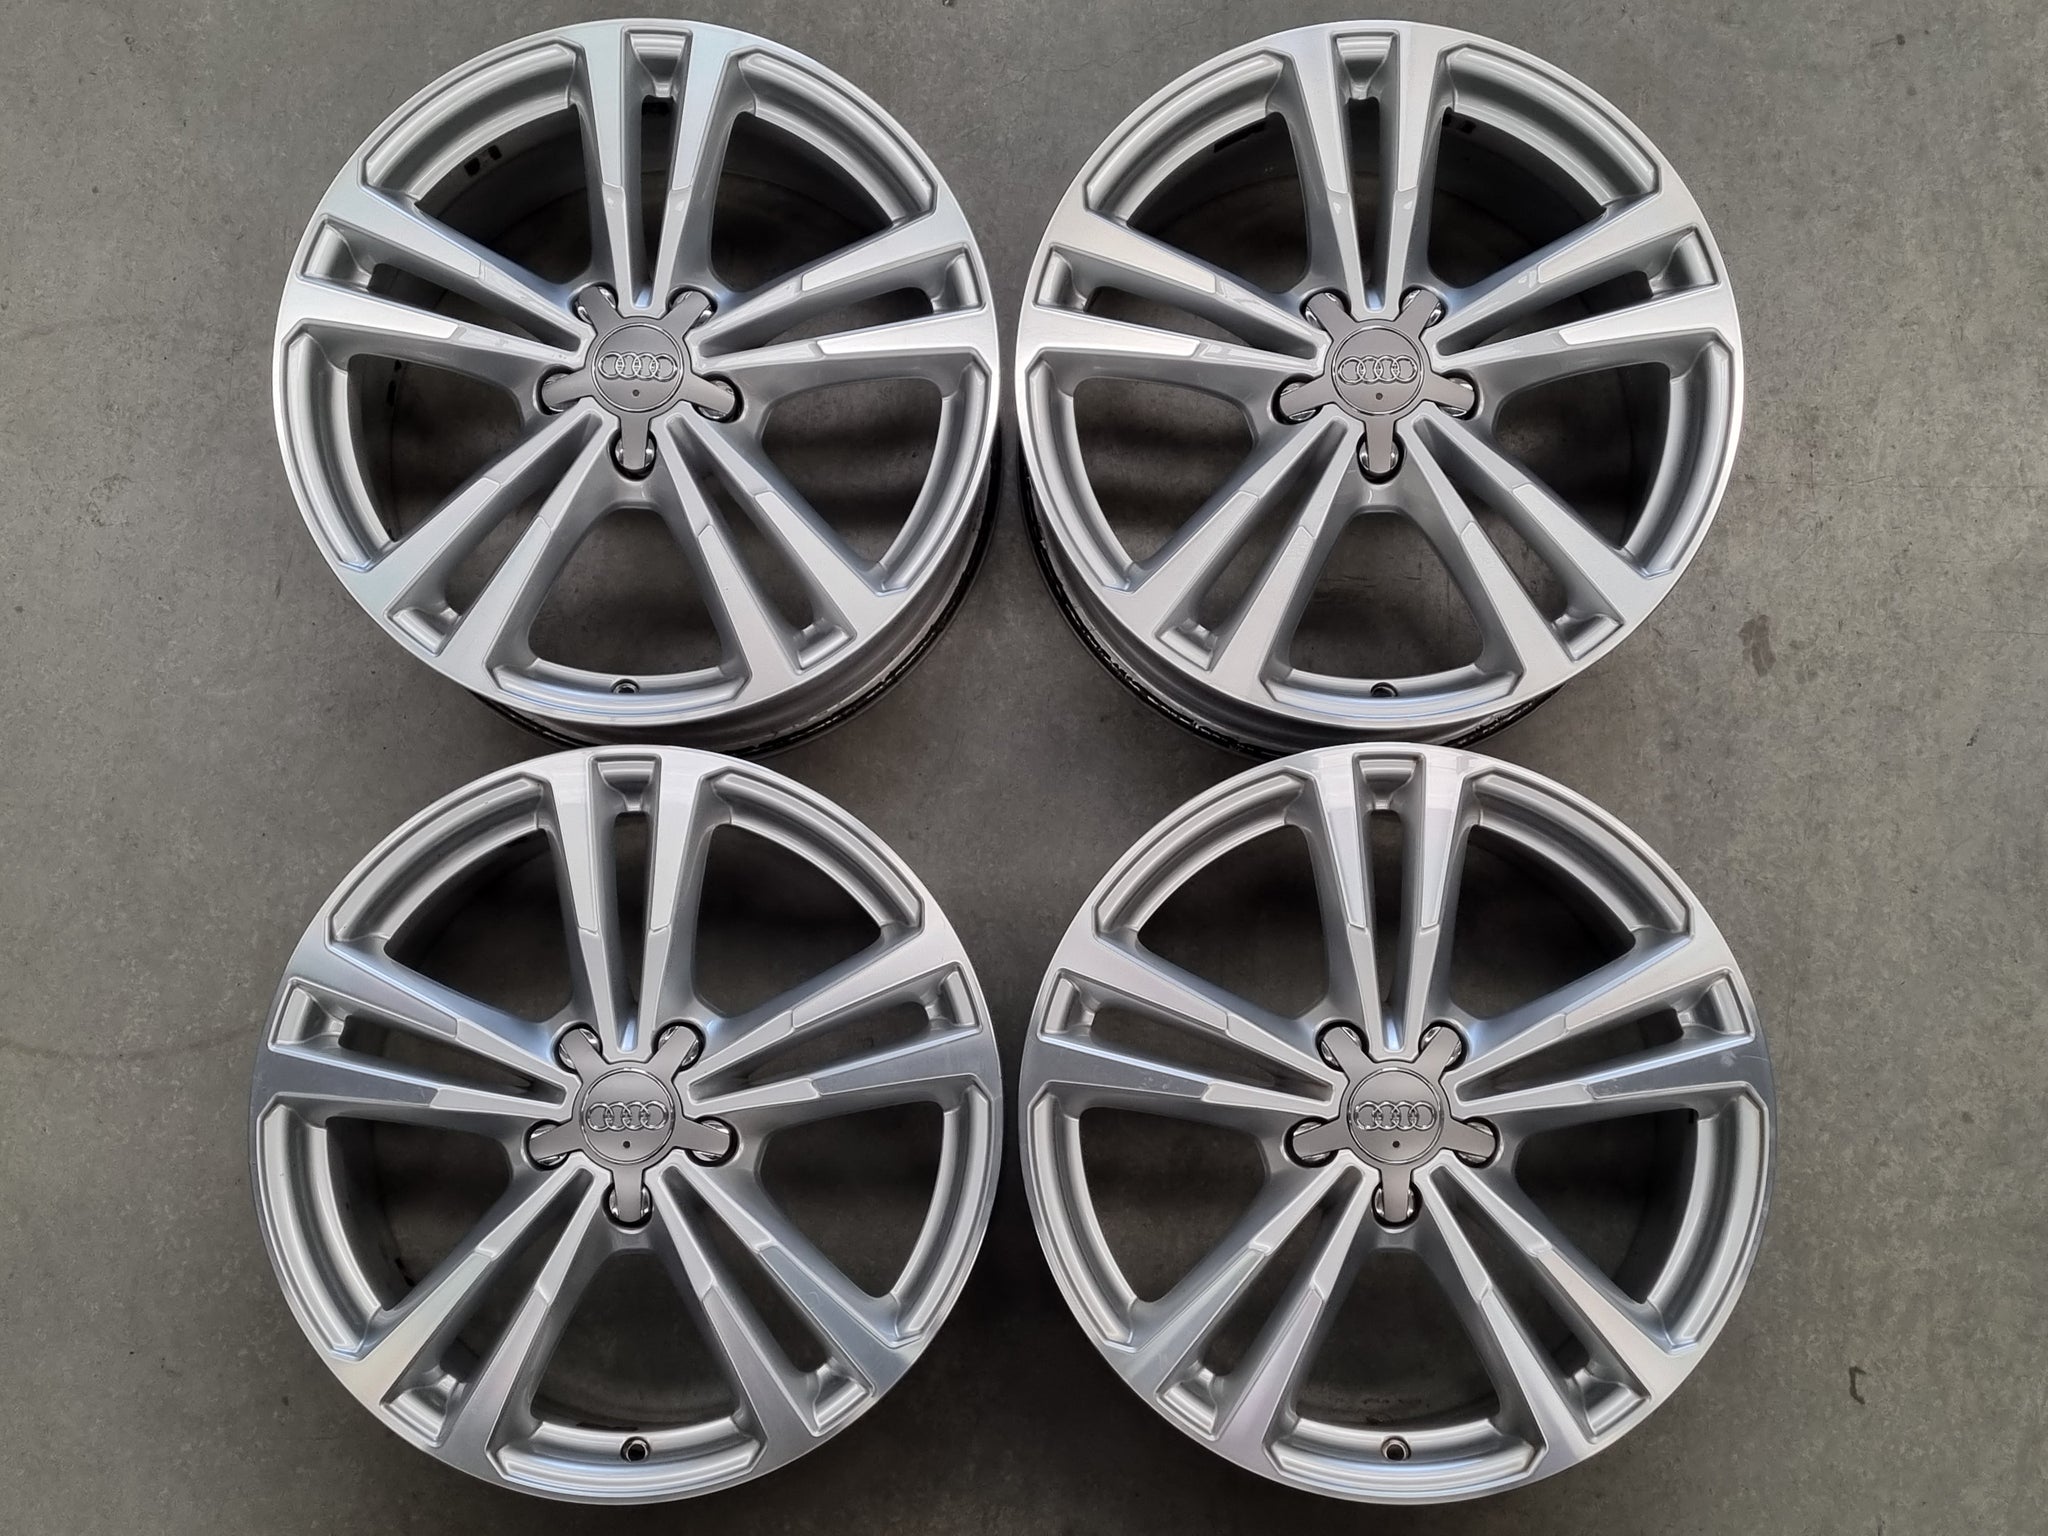 Load image into Gallery viewer, Genuine AUDI S3 Silver 2018 Model 18 Inch Alloy Wheels Set of 4
